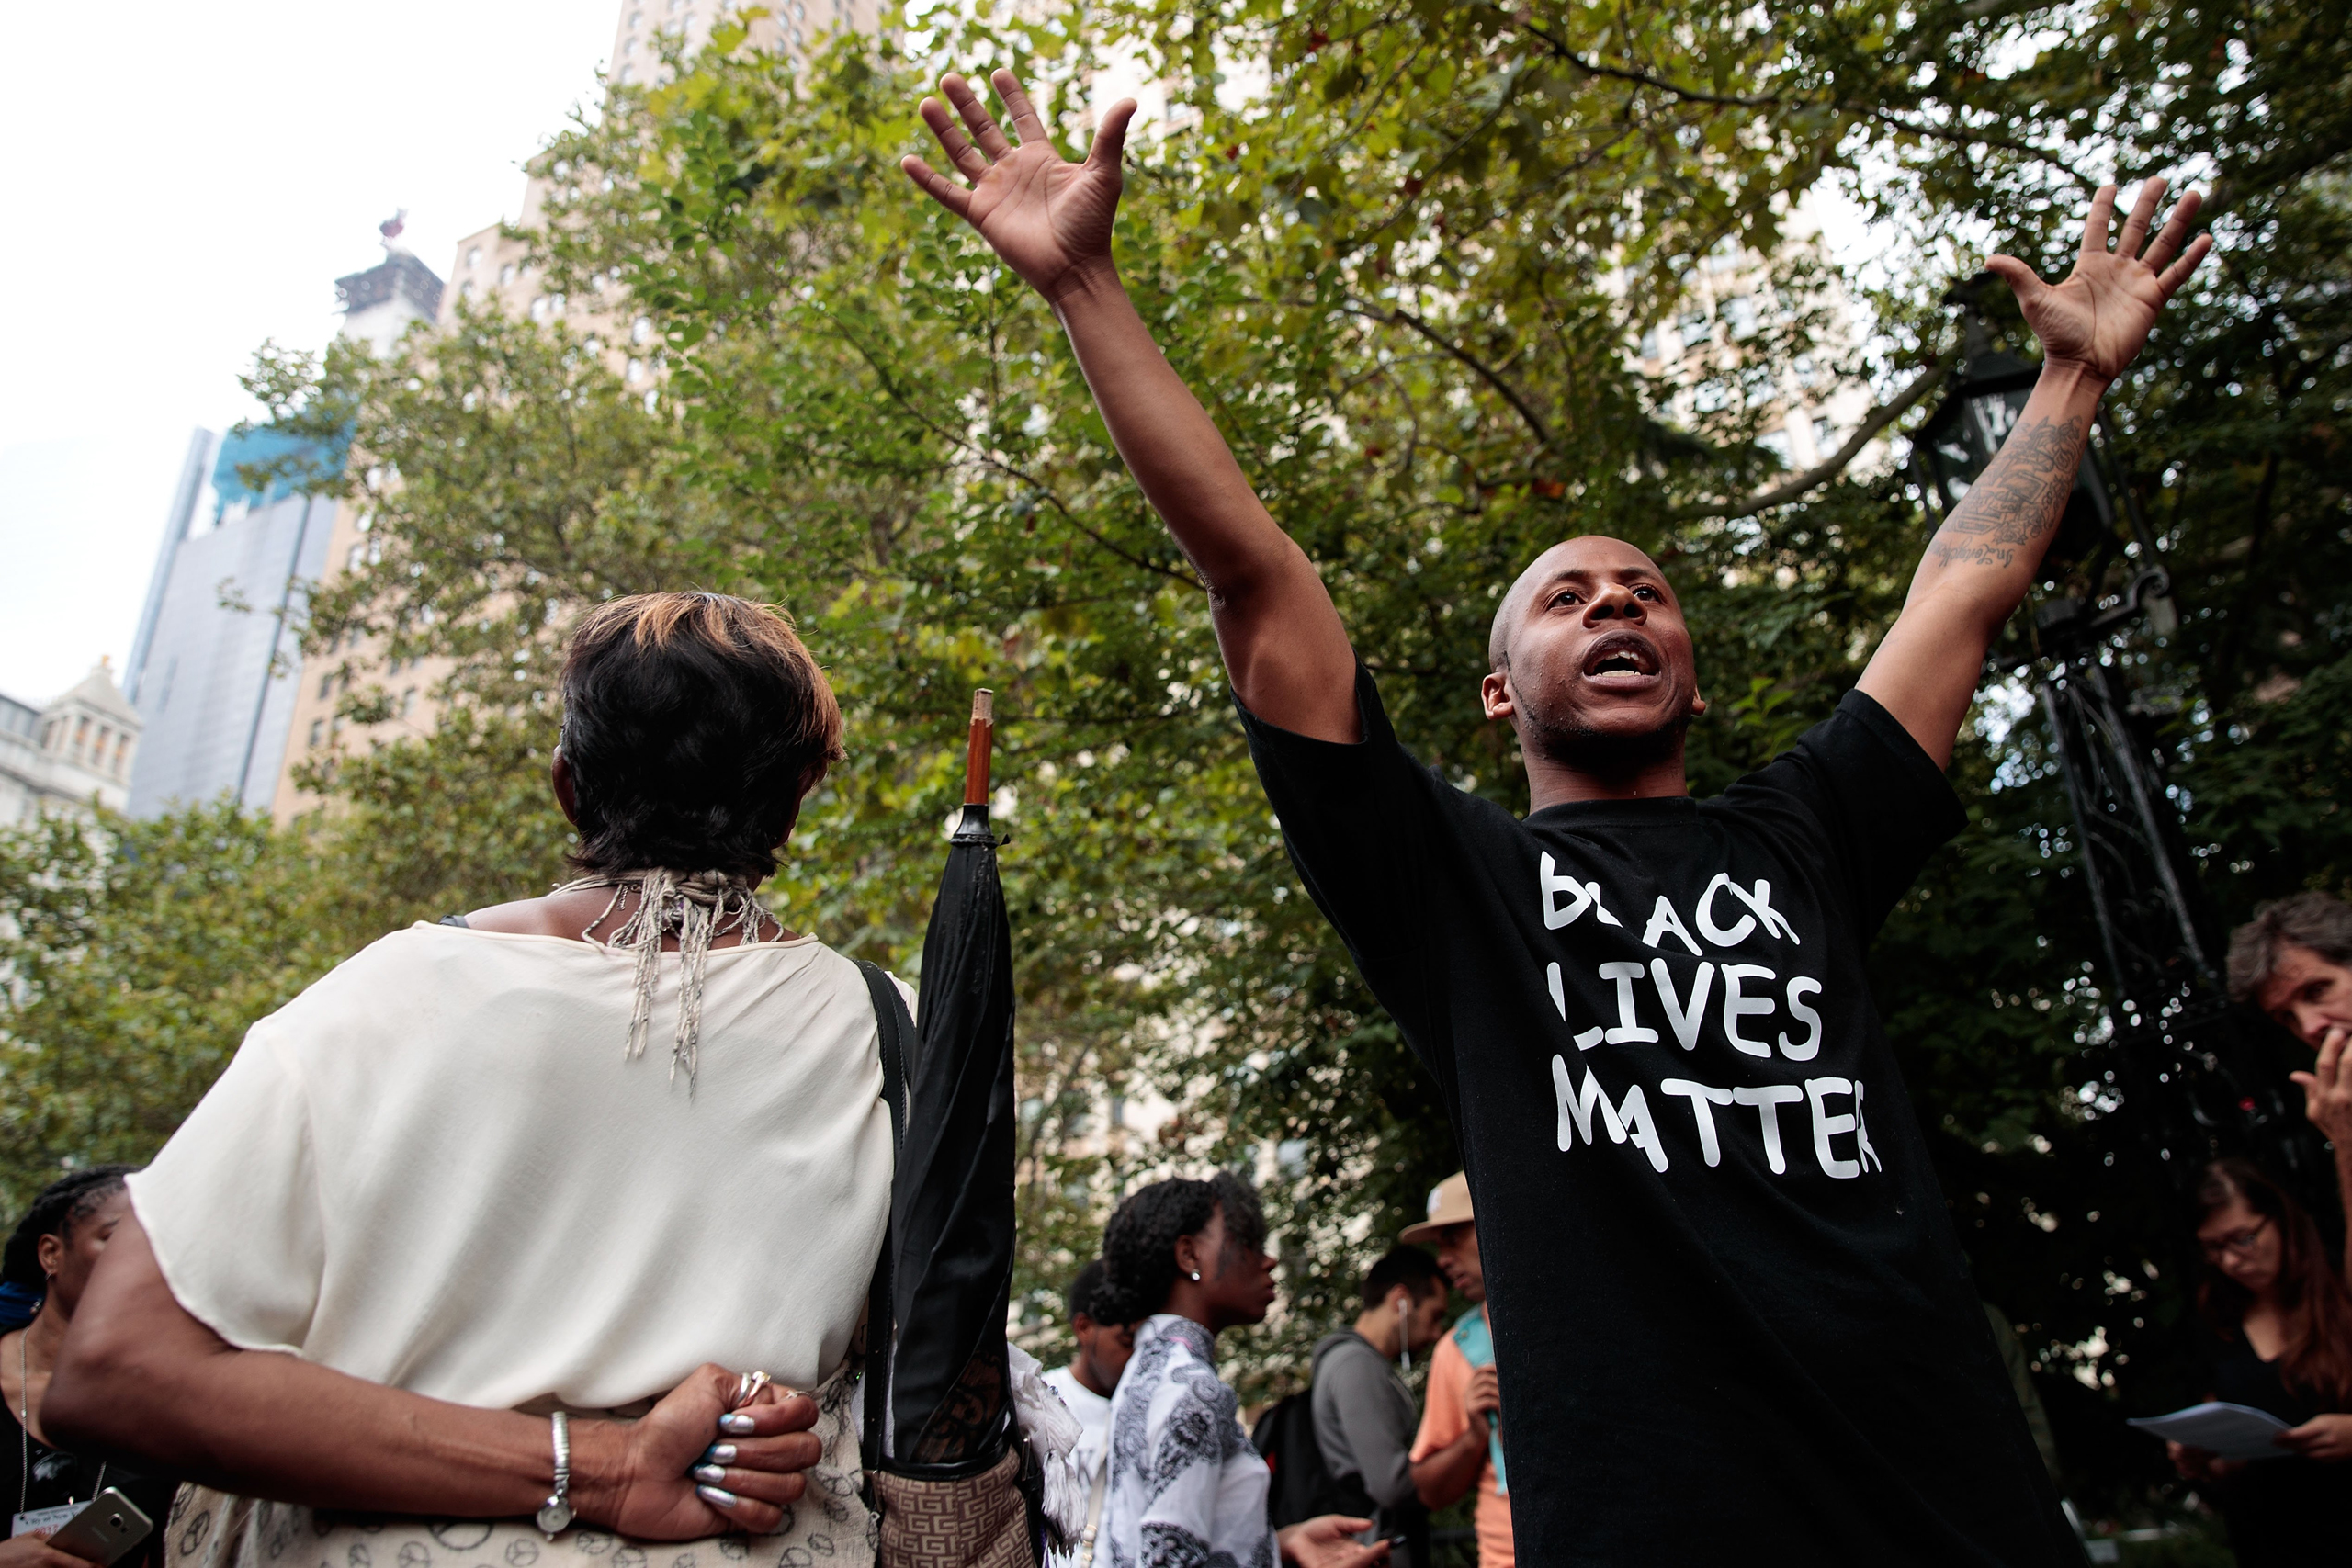 People rally during a protest against police brutality at City Hall Park in New York City on Aug. 1, 2016. (Drew Angerer—Getty Images)